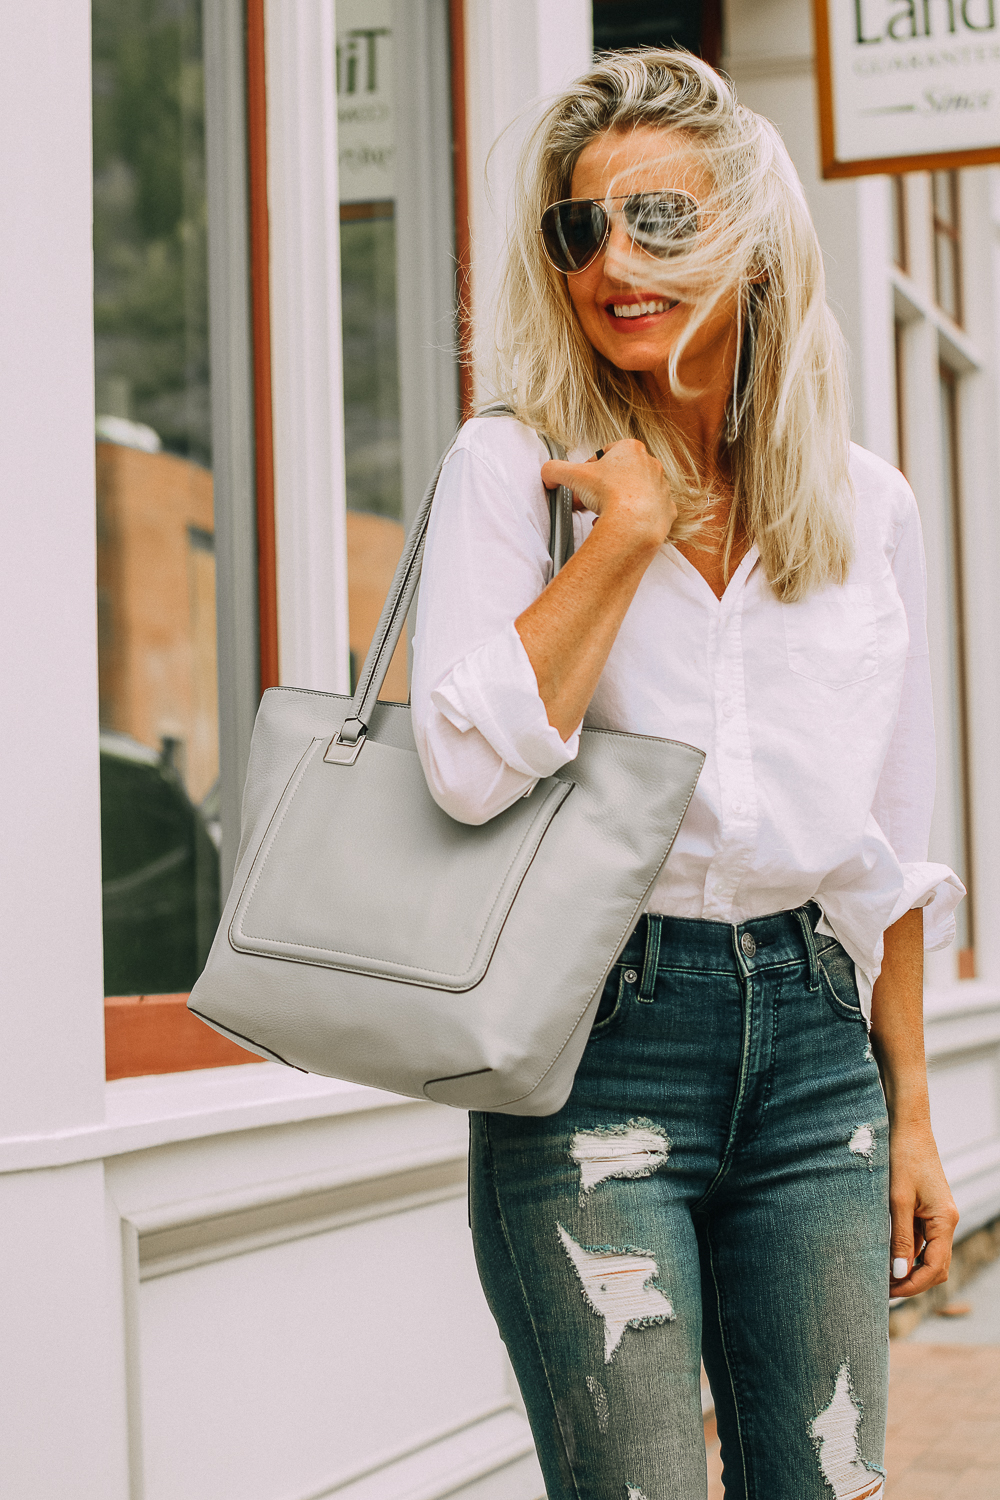 Vince Camuto gray tote bag paired with white button down frank and eileen shirt